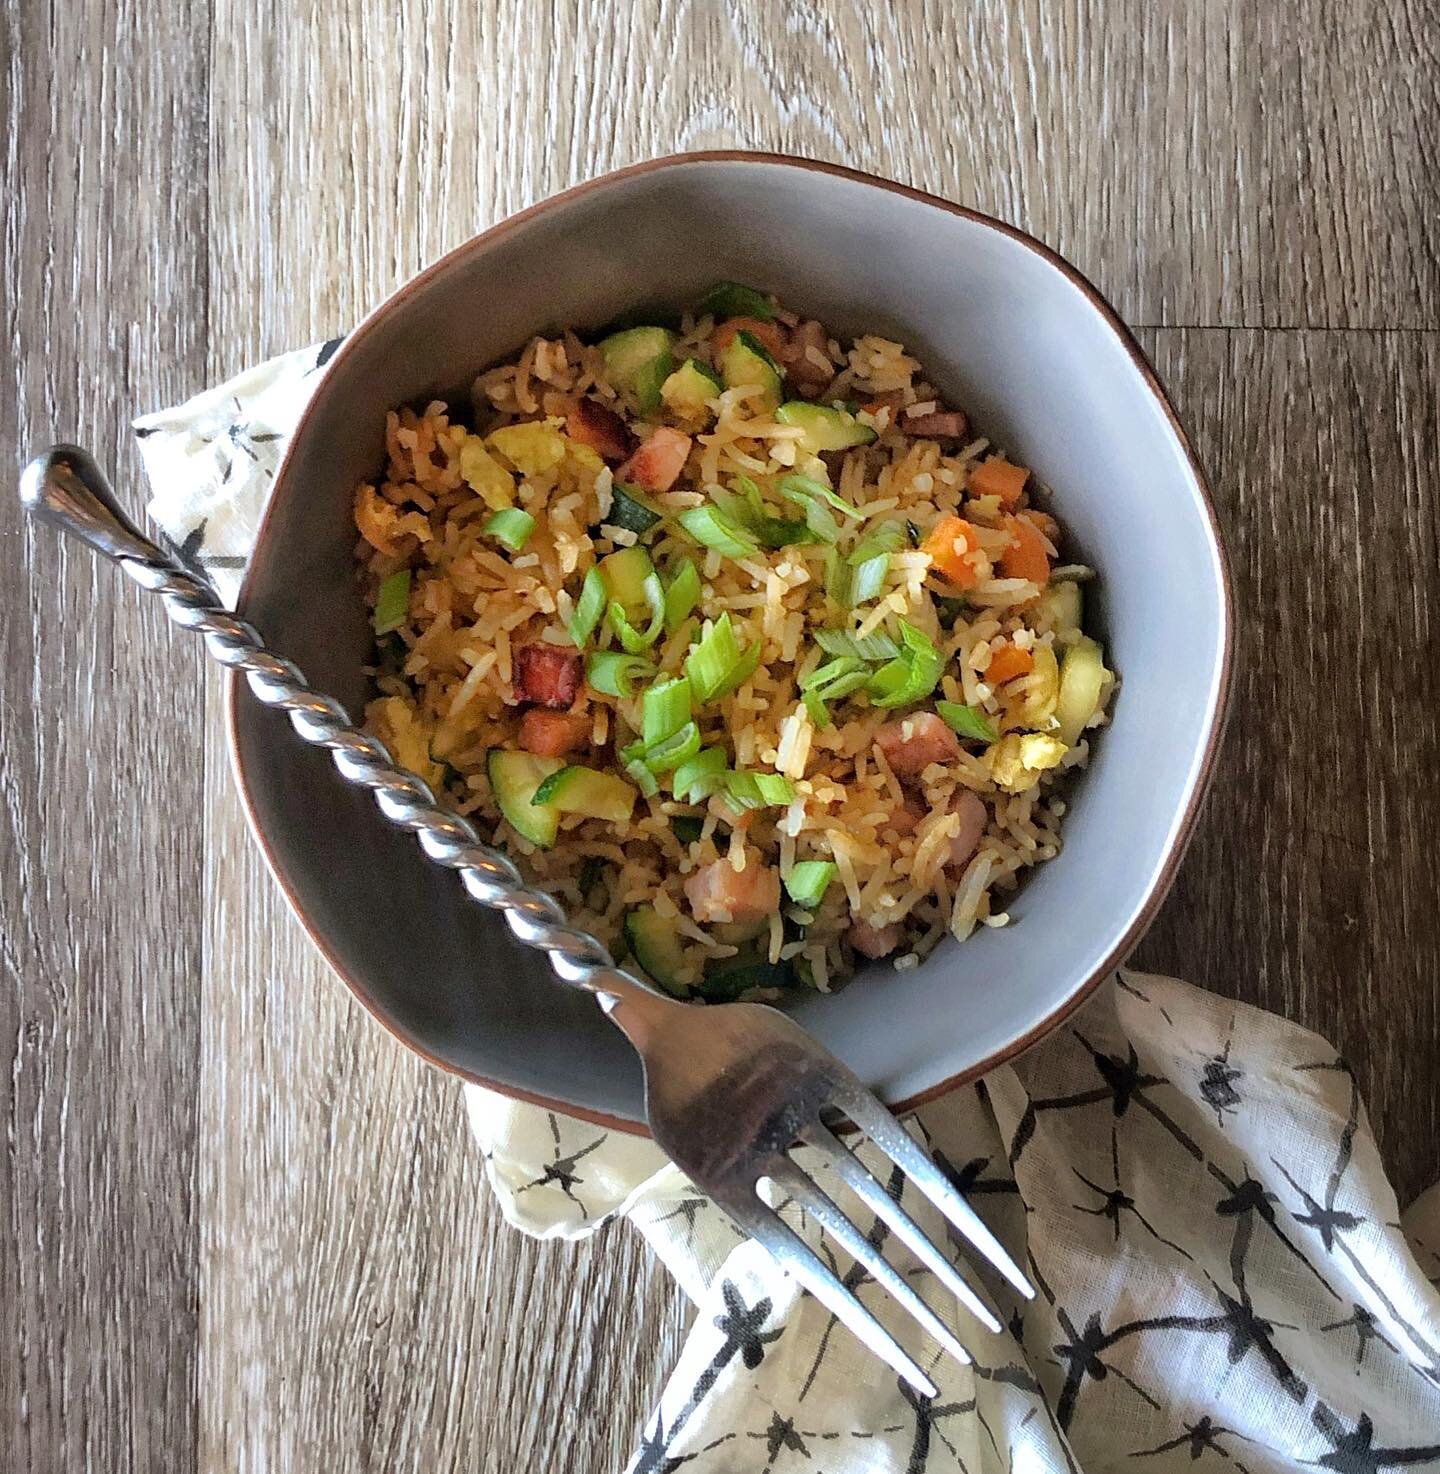 Whaaaaaaat? I didn&rsquo;t share my finished &ldquo;leftover Easter ham &amp; whatever&rsquo;s in the fridge&rdquo; fried rice transformation with you yet? The suspense is over! Leftovers for the win. 😍🍚✨